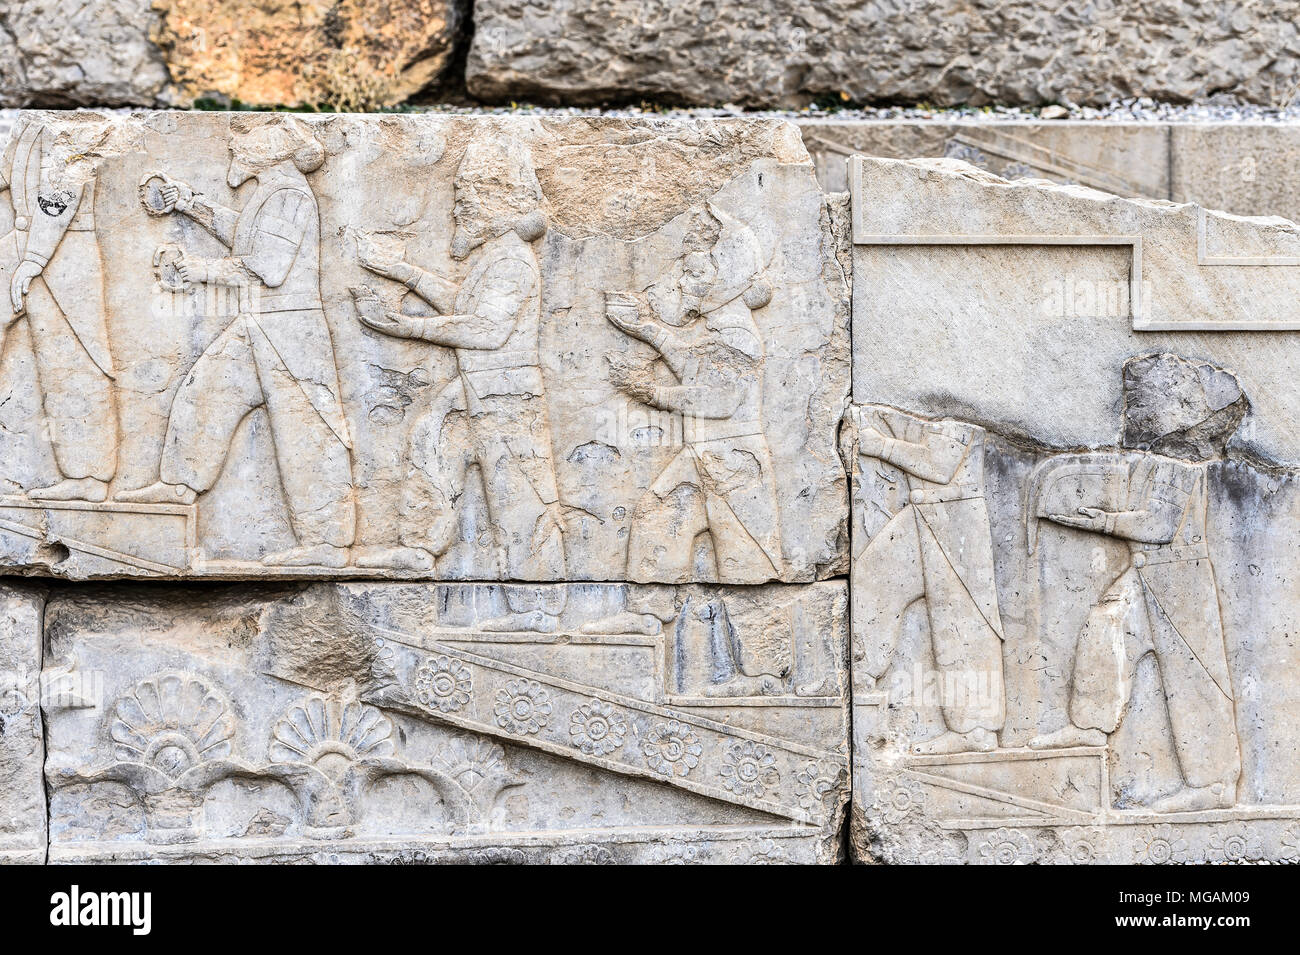 Ancient stone relief in Persepolis, the ceremonial capital of the ...